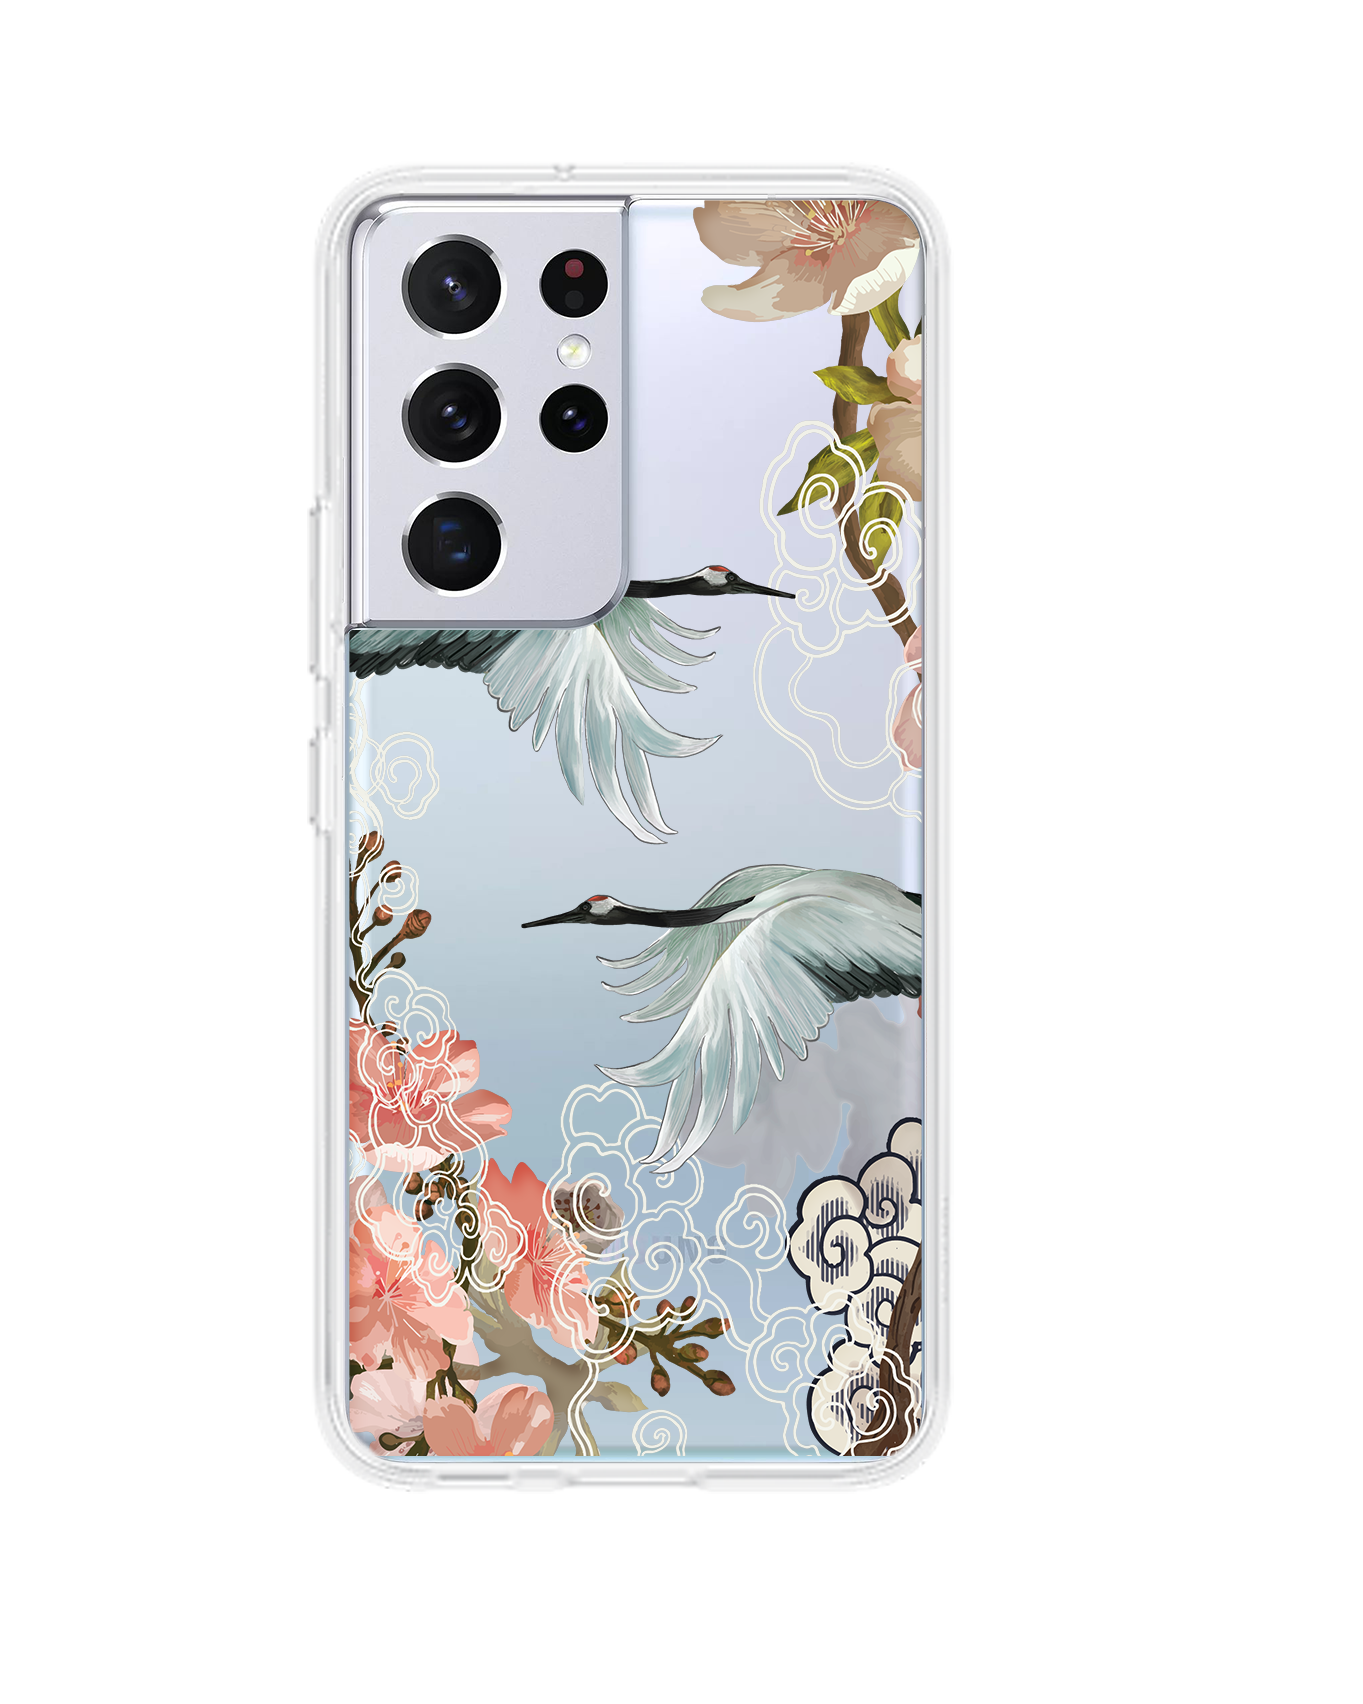 Android Rearguard Hybrid Case - Oil Painting Birds